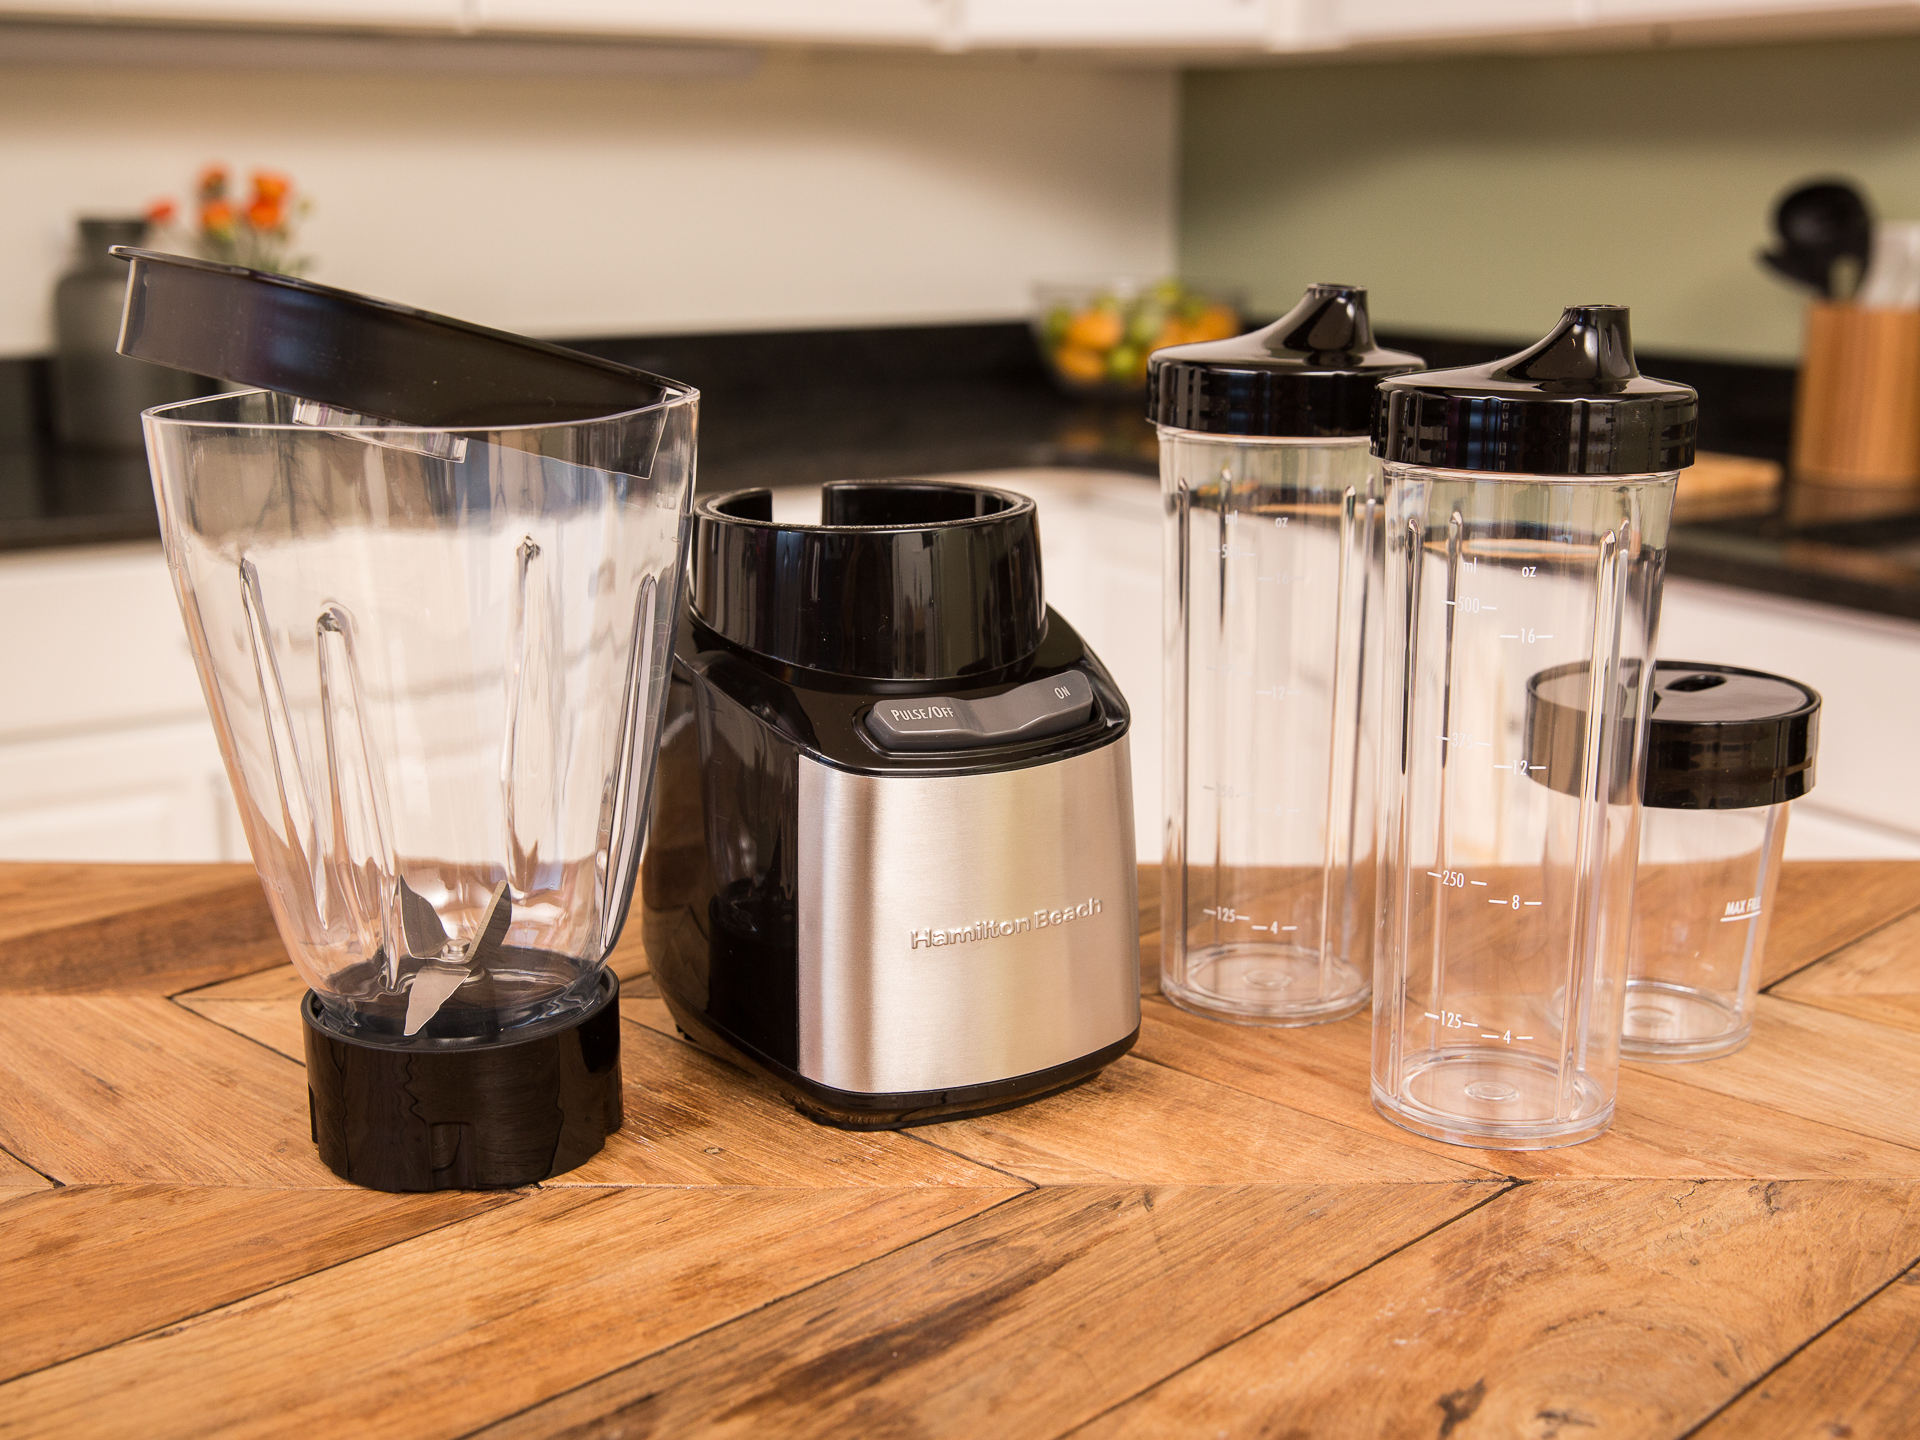 Occurrence leaf Unpretentious Hamilton Beach Stay or Go Blender review: Easy but slow smoothies to grab  and go - CNET